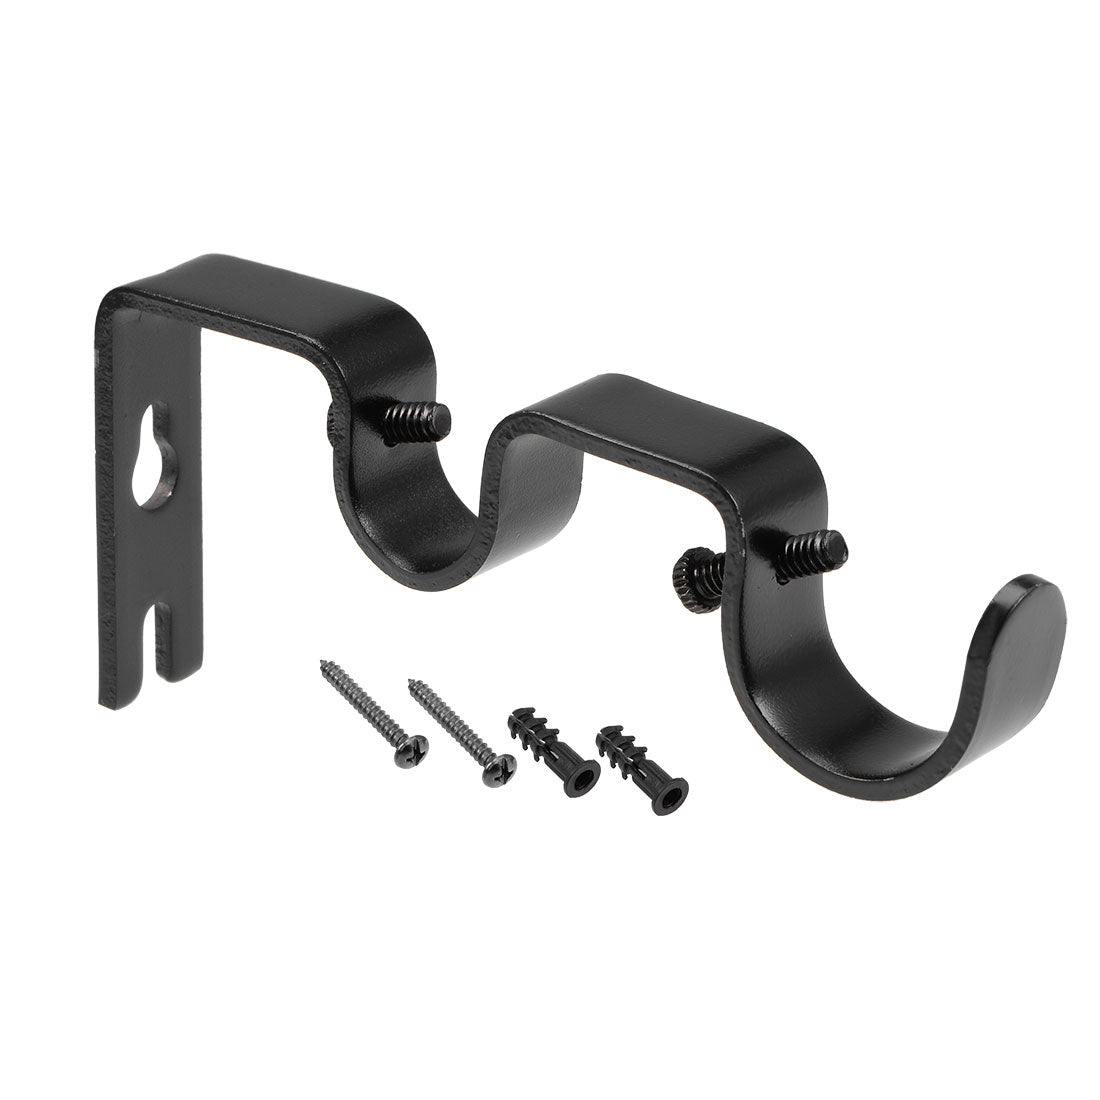 uxcell Uxcell Curtain Rod Bracket Iron Double Holder Support for 18mm 27mm Drapery Rod, 122 x 53 x 16mm Black